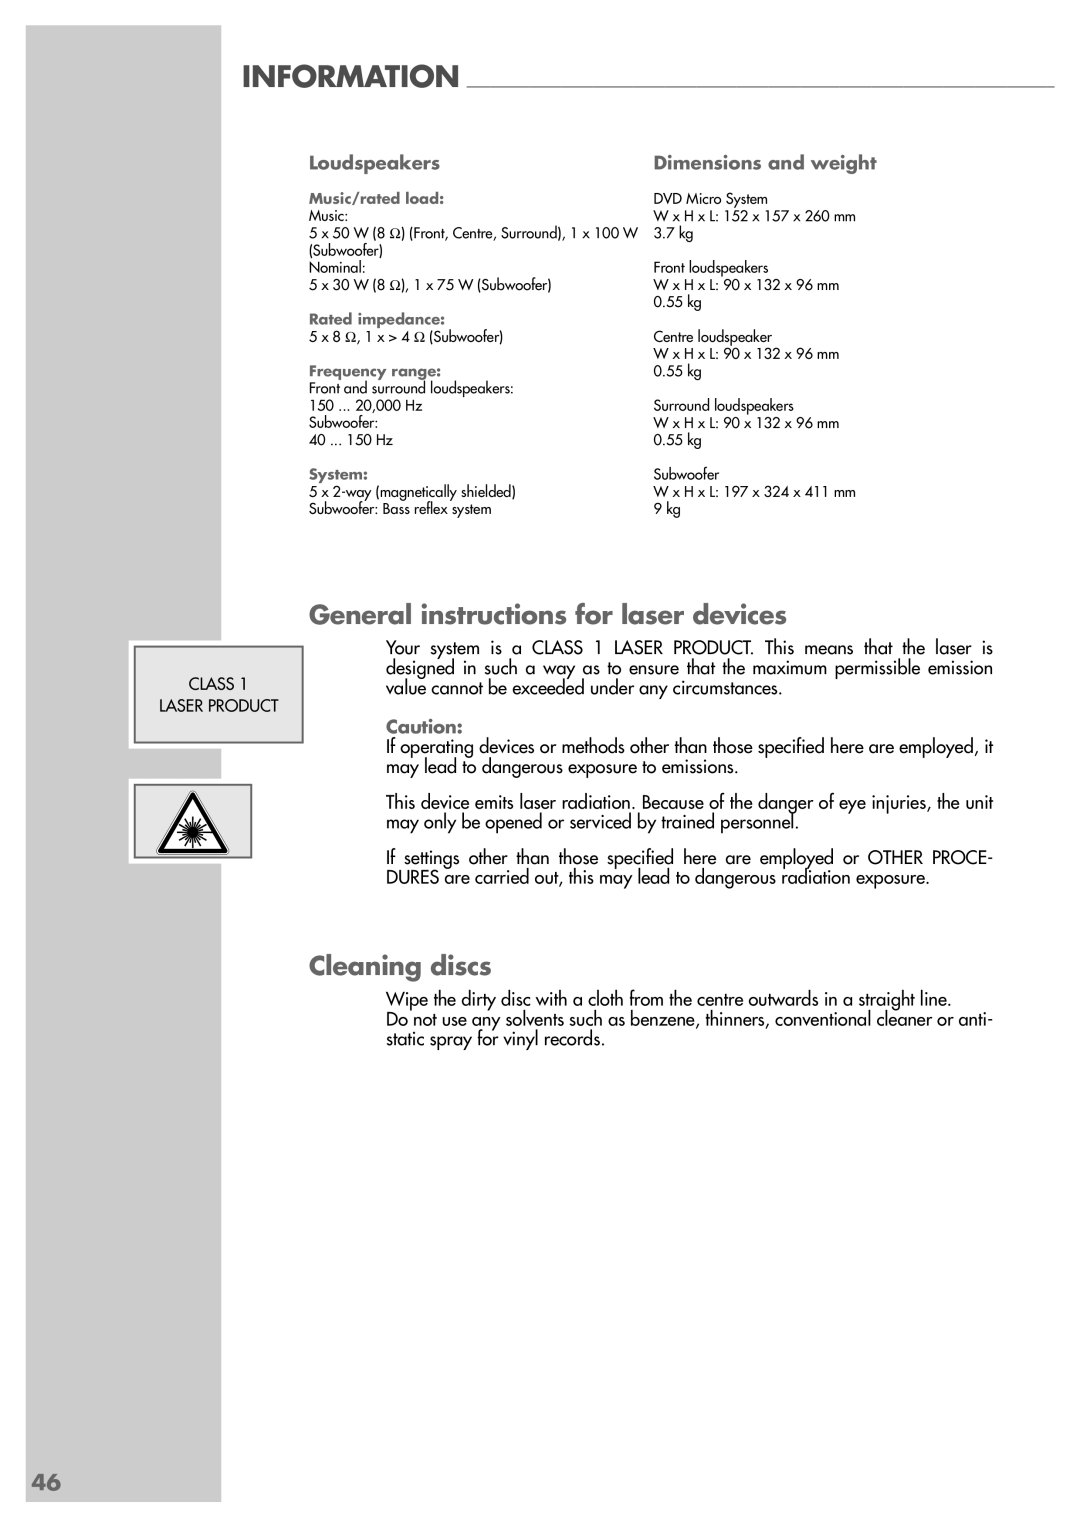 Grundig Scenos UMS 6400 DVD General instructions for laser devices, Cleaning discs, Loudspeakers, Dimensions and weight 